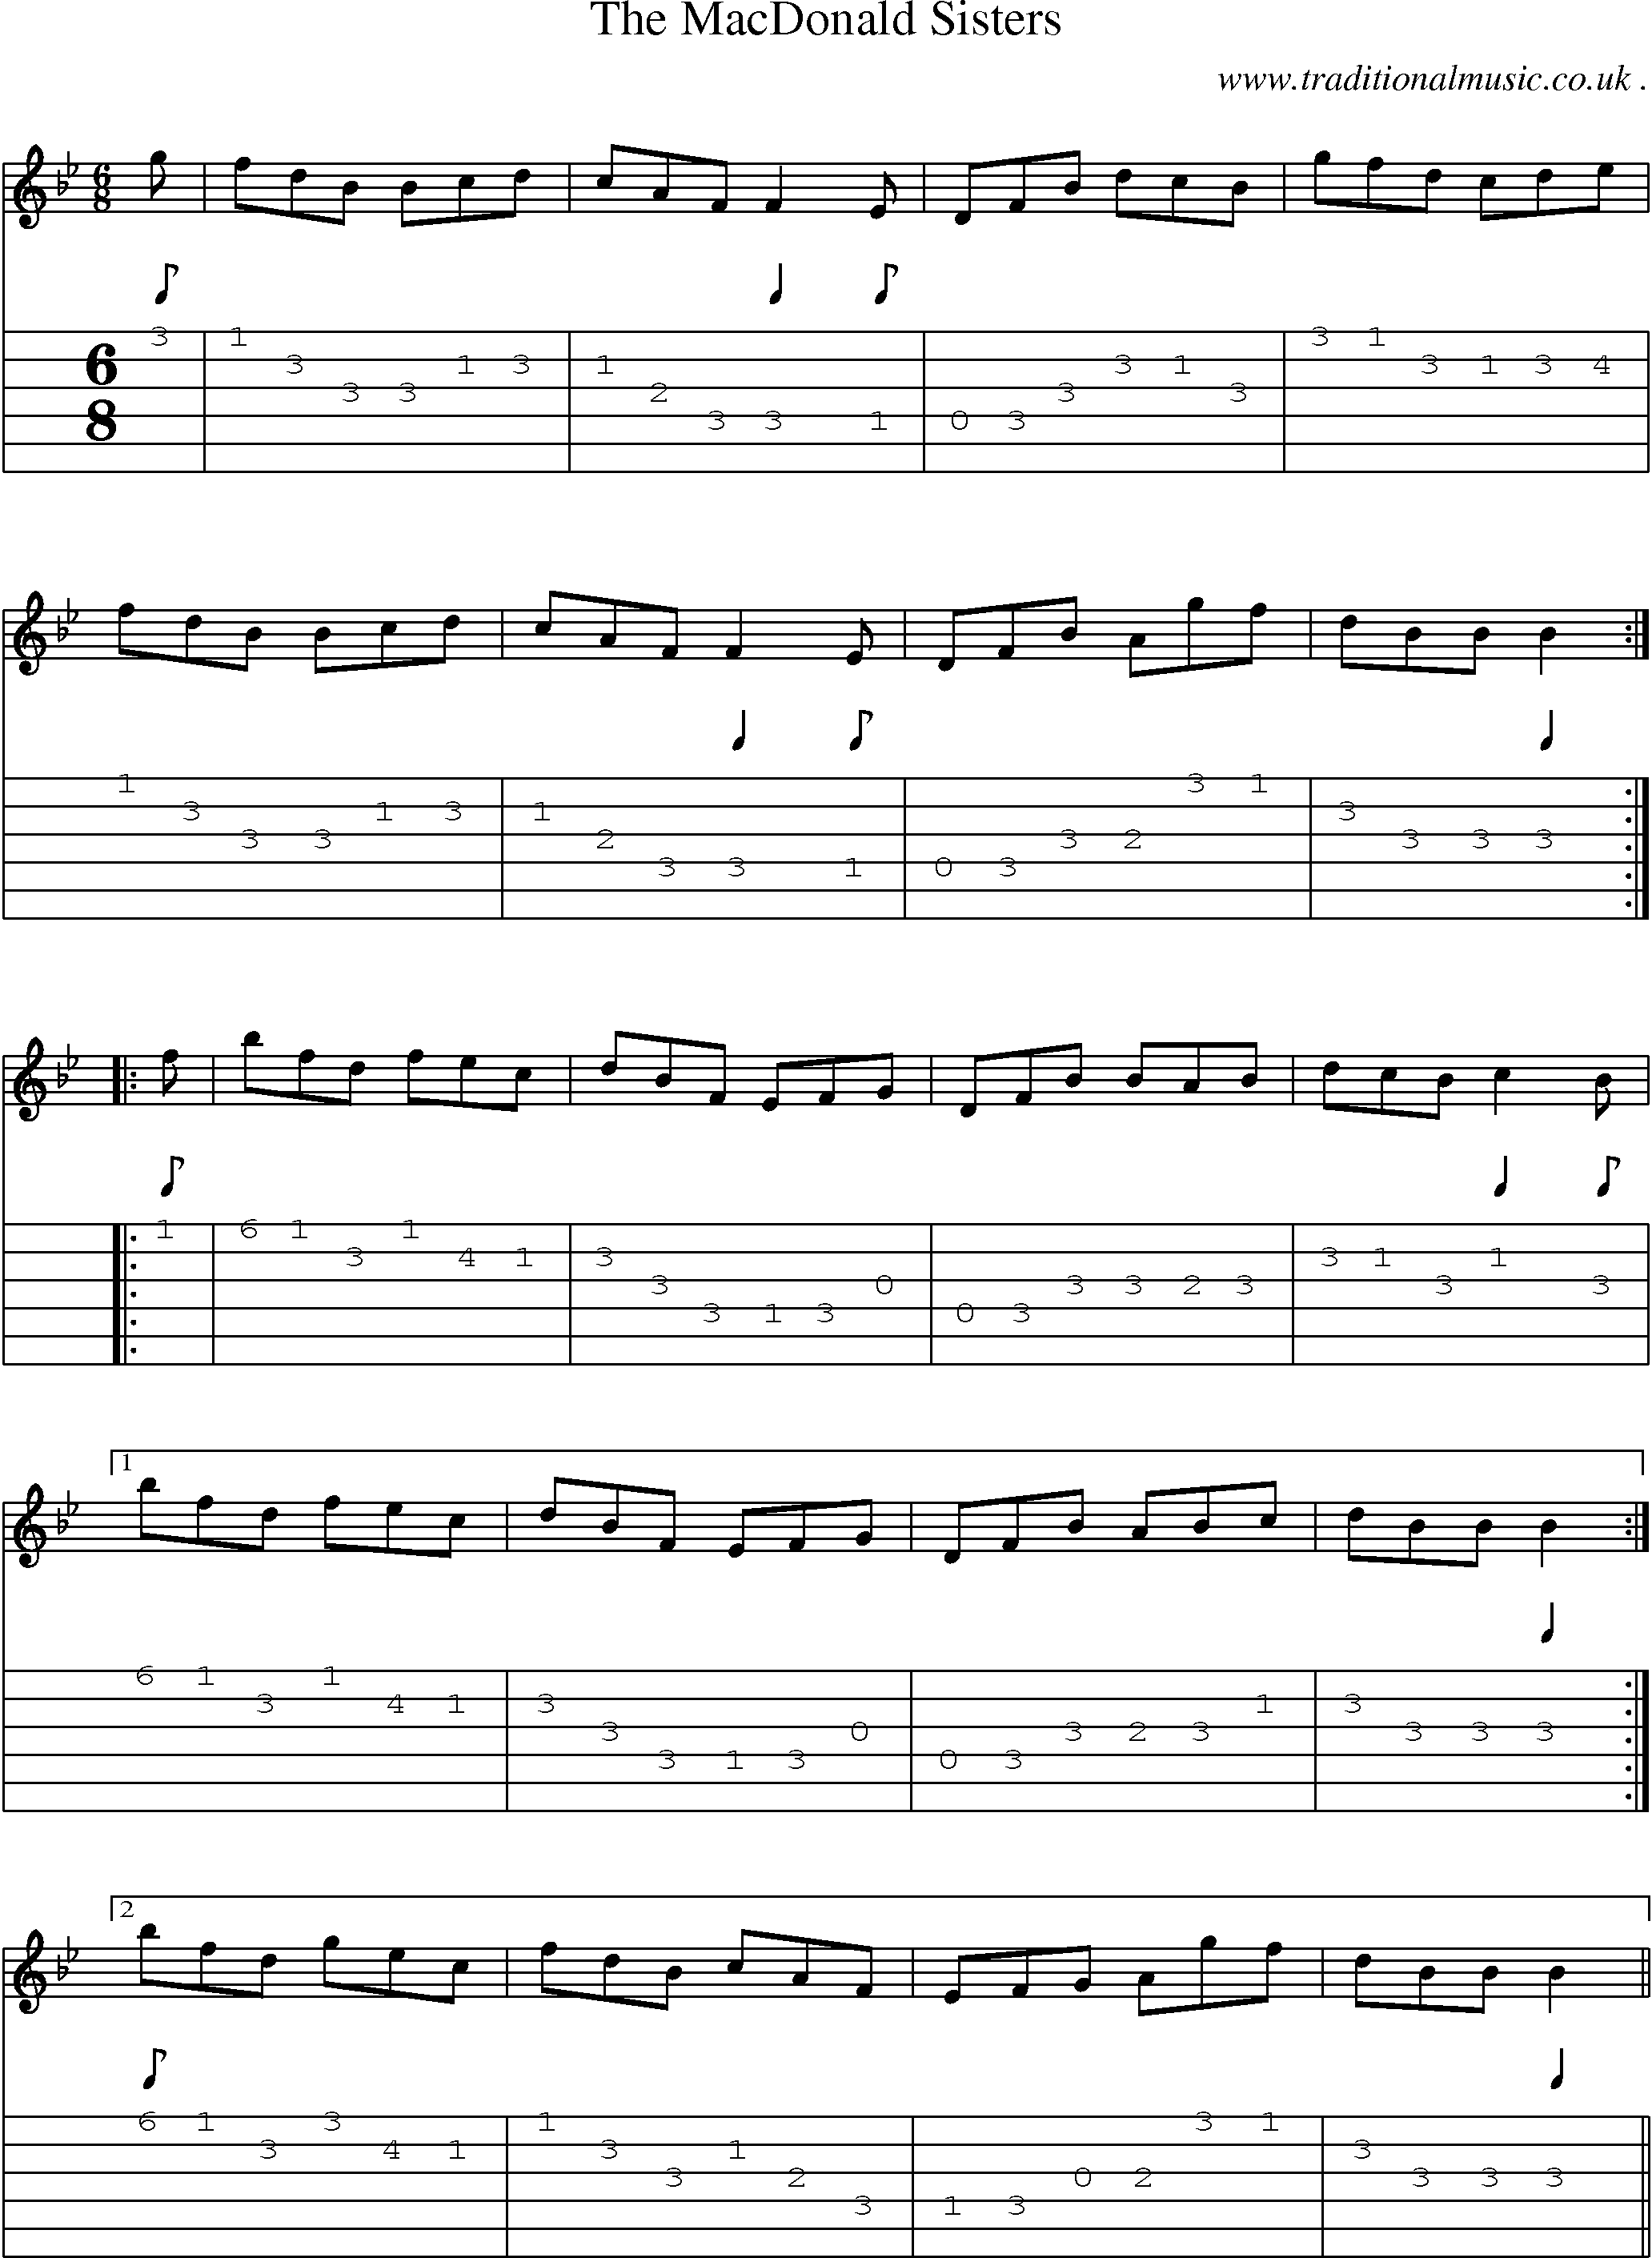 Sheet-Music and Guitar Tabs for The Macdonald Sisters